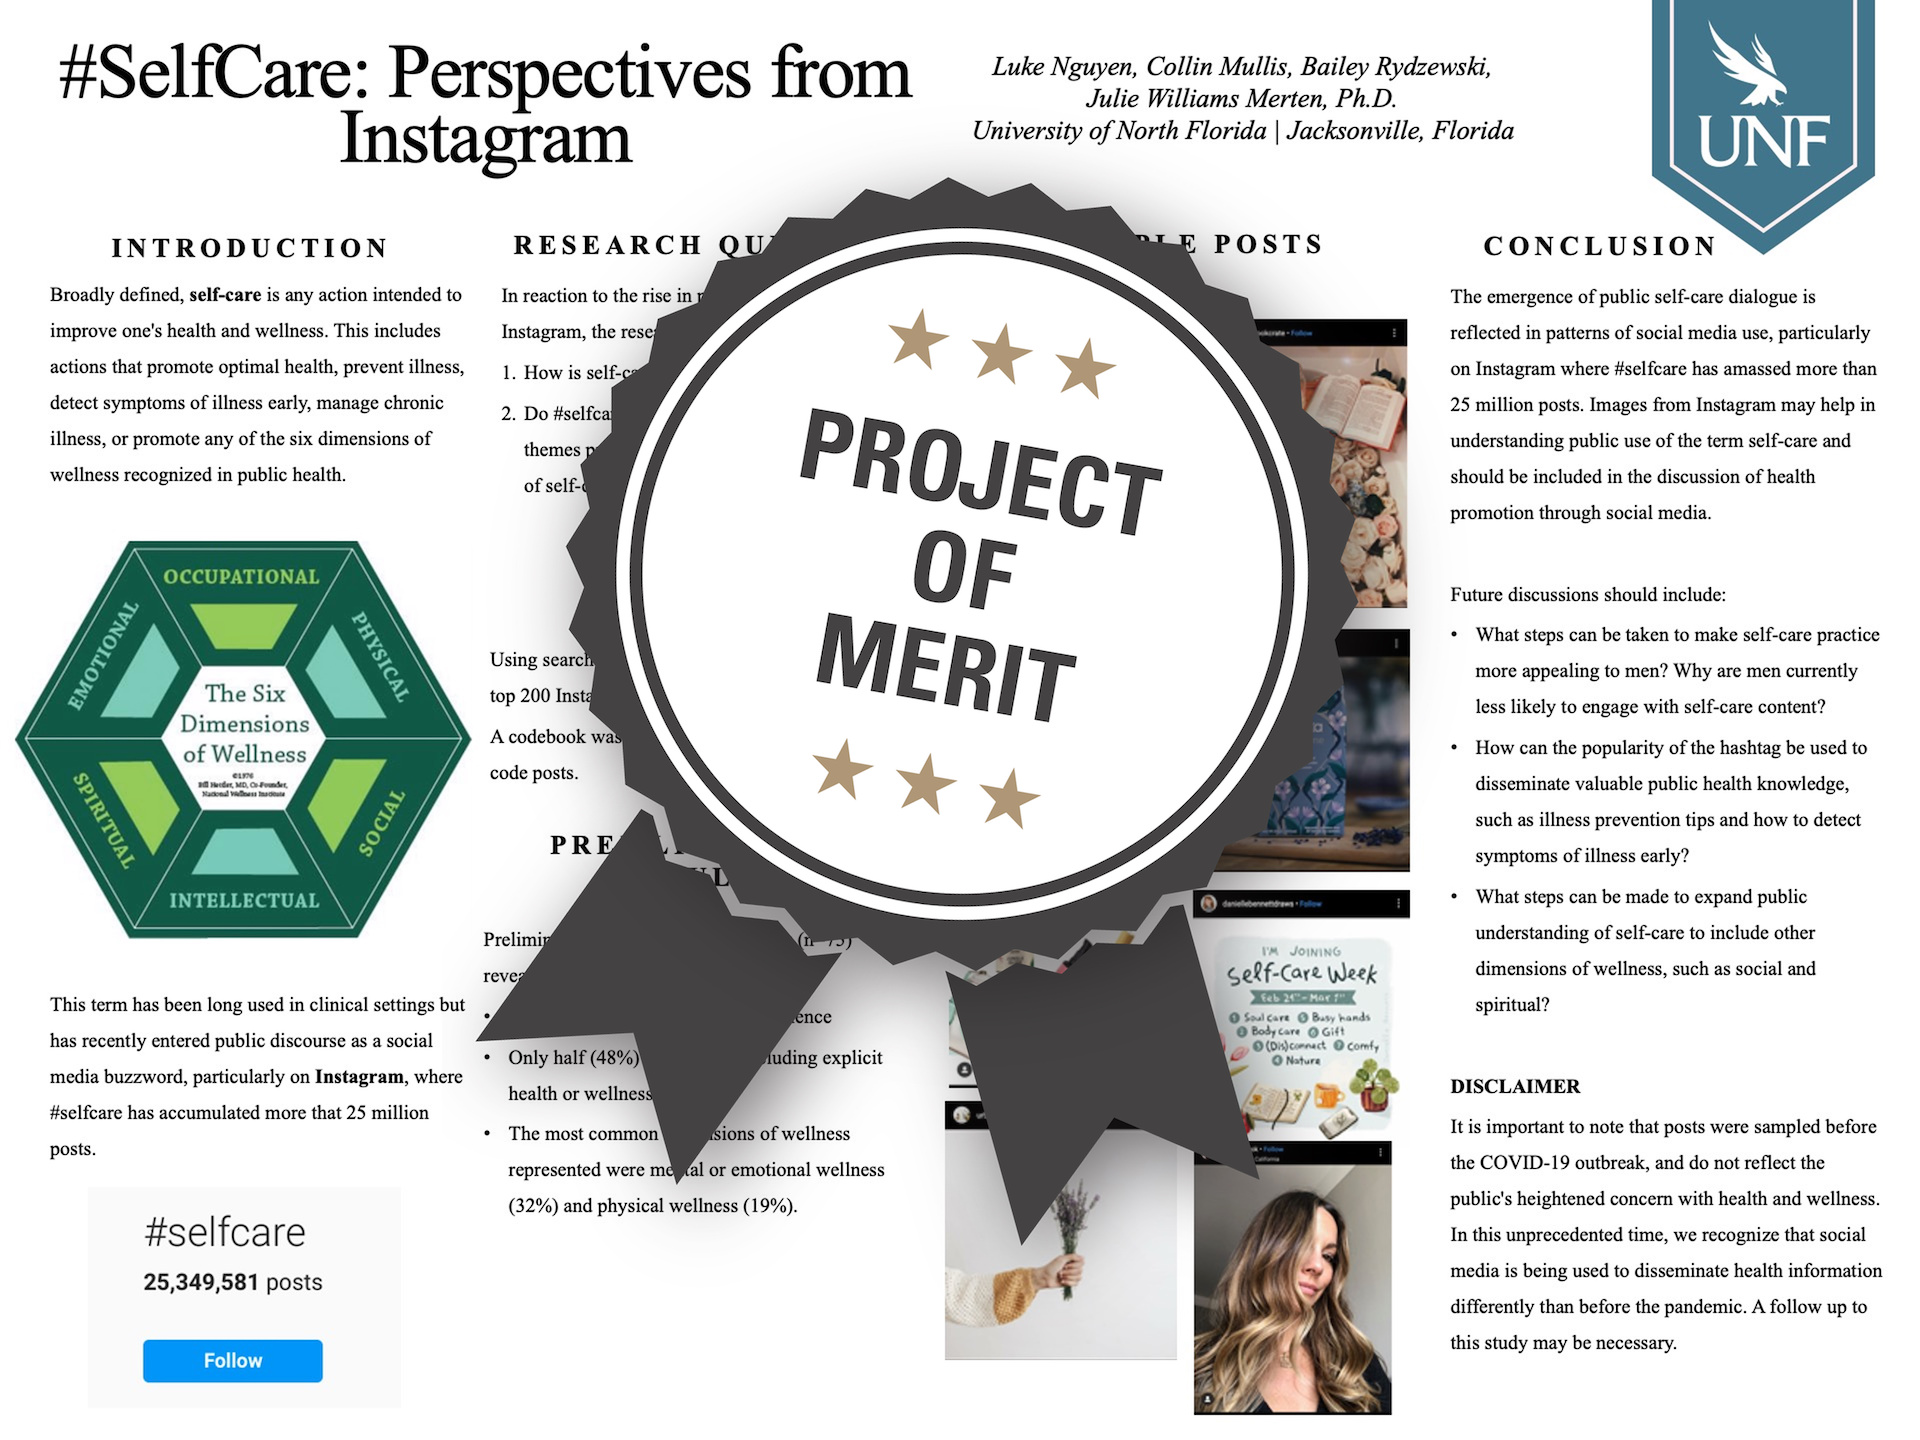 #SelfCare: Perspectives from Instagram Project of Merit poster